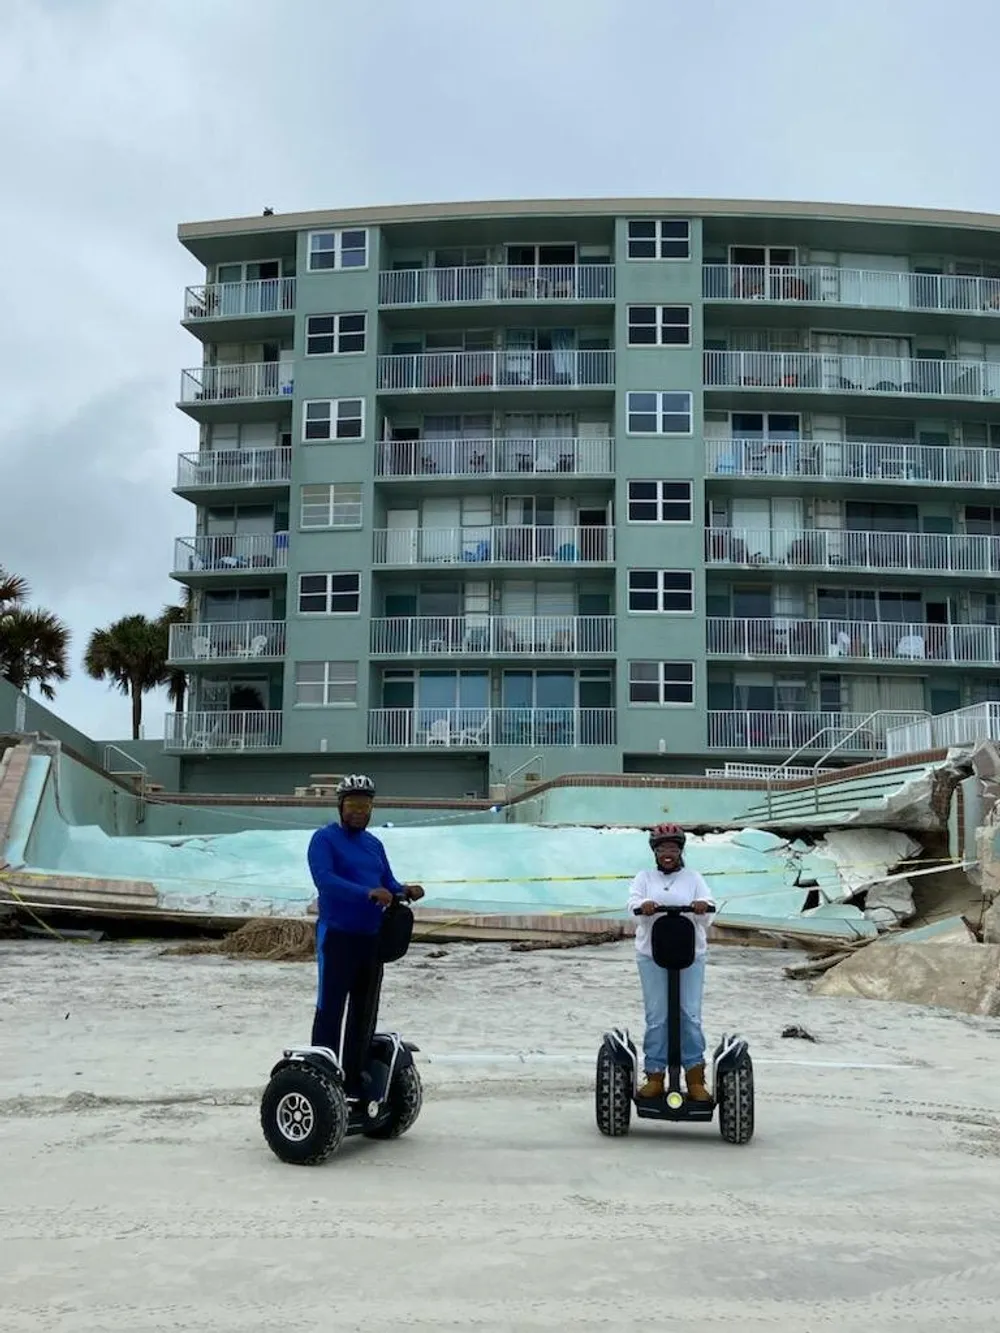 Two individuals are riding Segways on a beach with a damaged building in the background